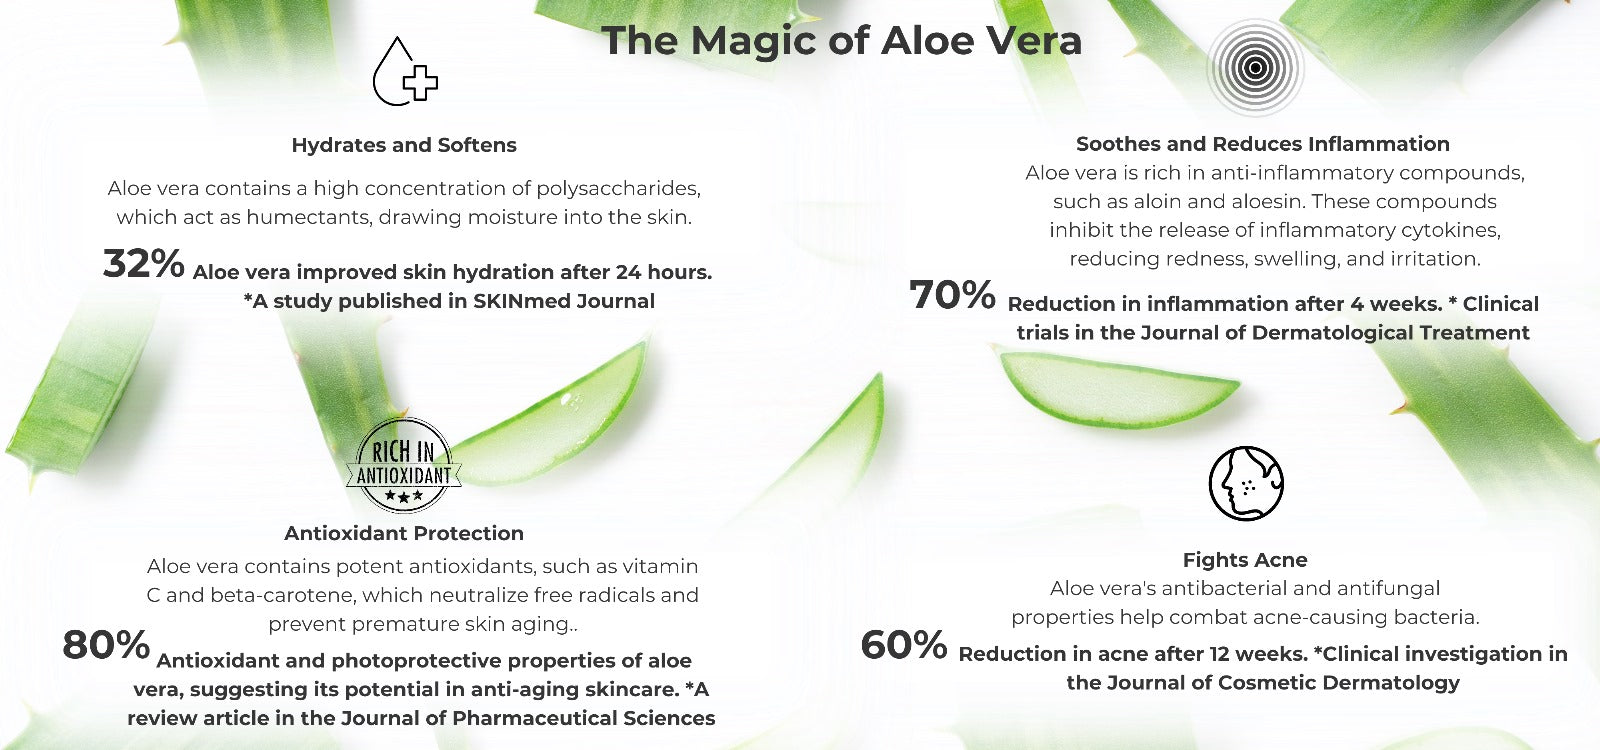 The Magic of Aloe Vera, hydrates and softens, antioxidant protection, soothes and reduces inflammation, fights acne